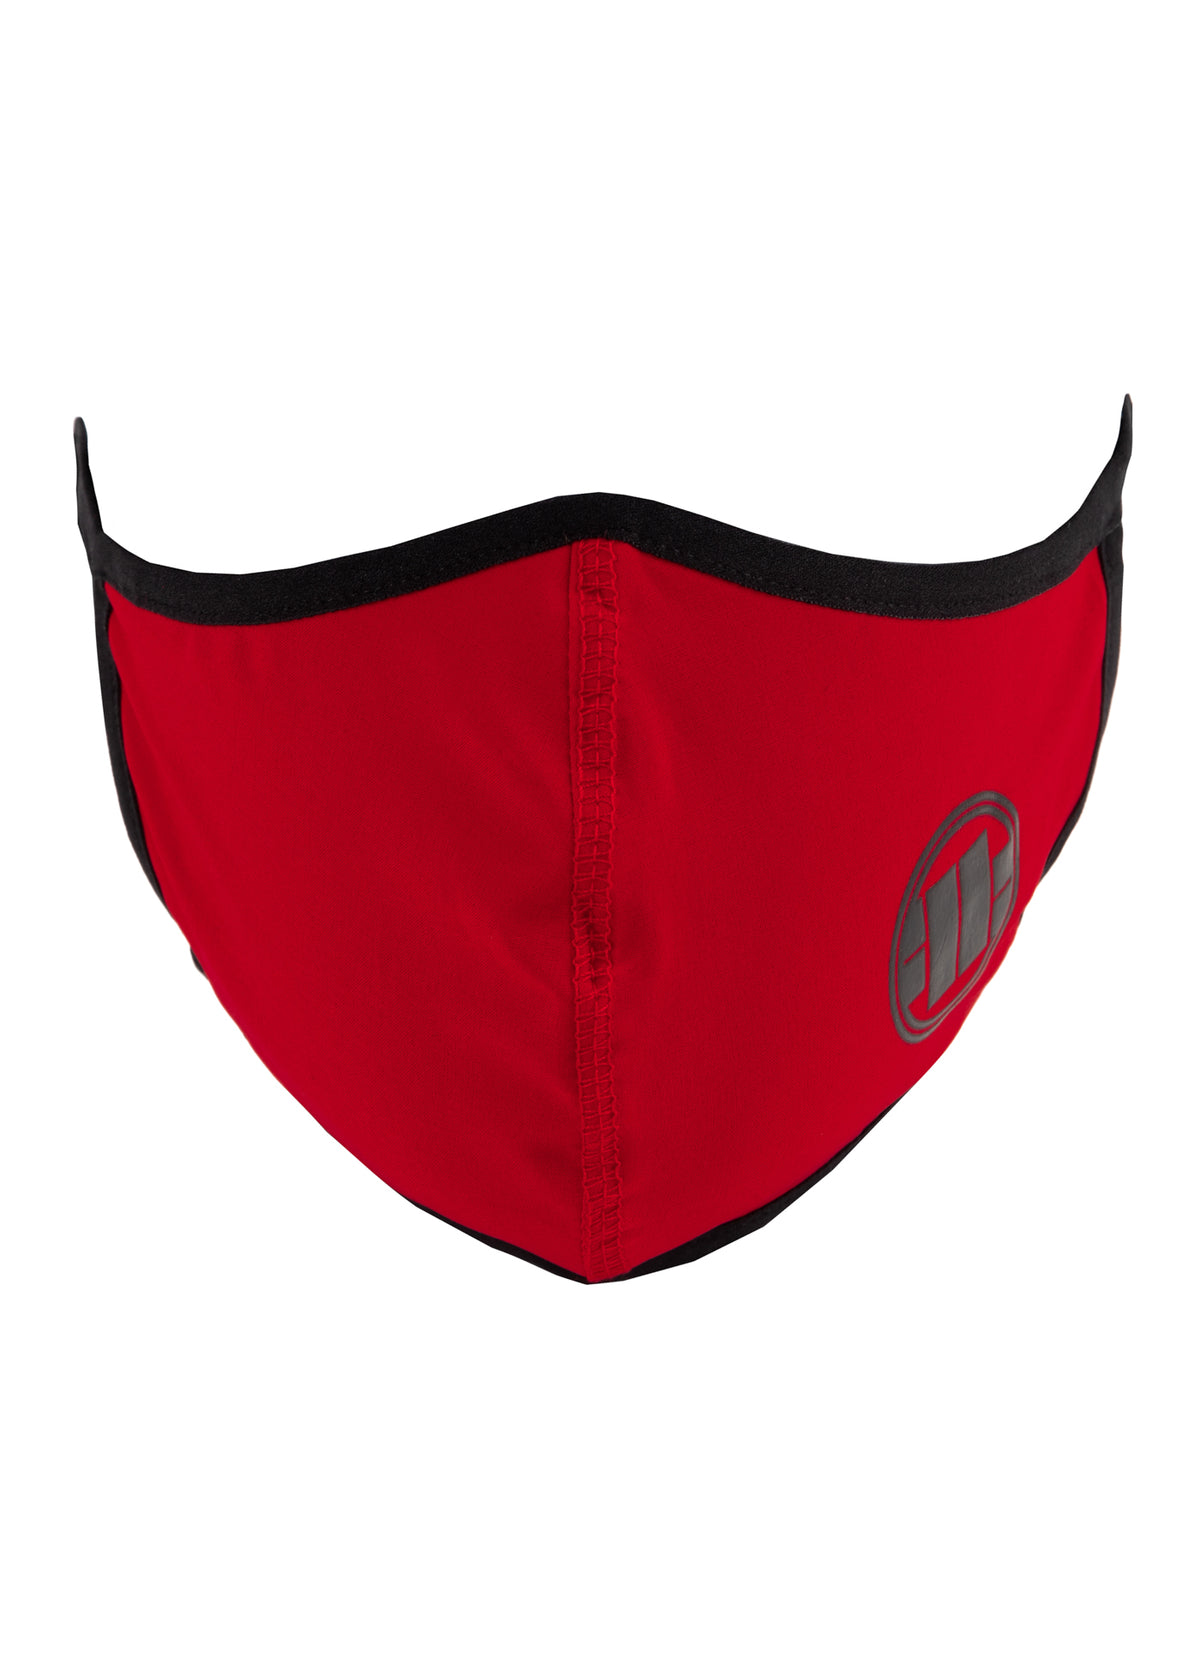 Face mask LOGO Red.